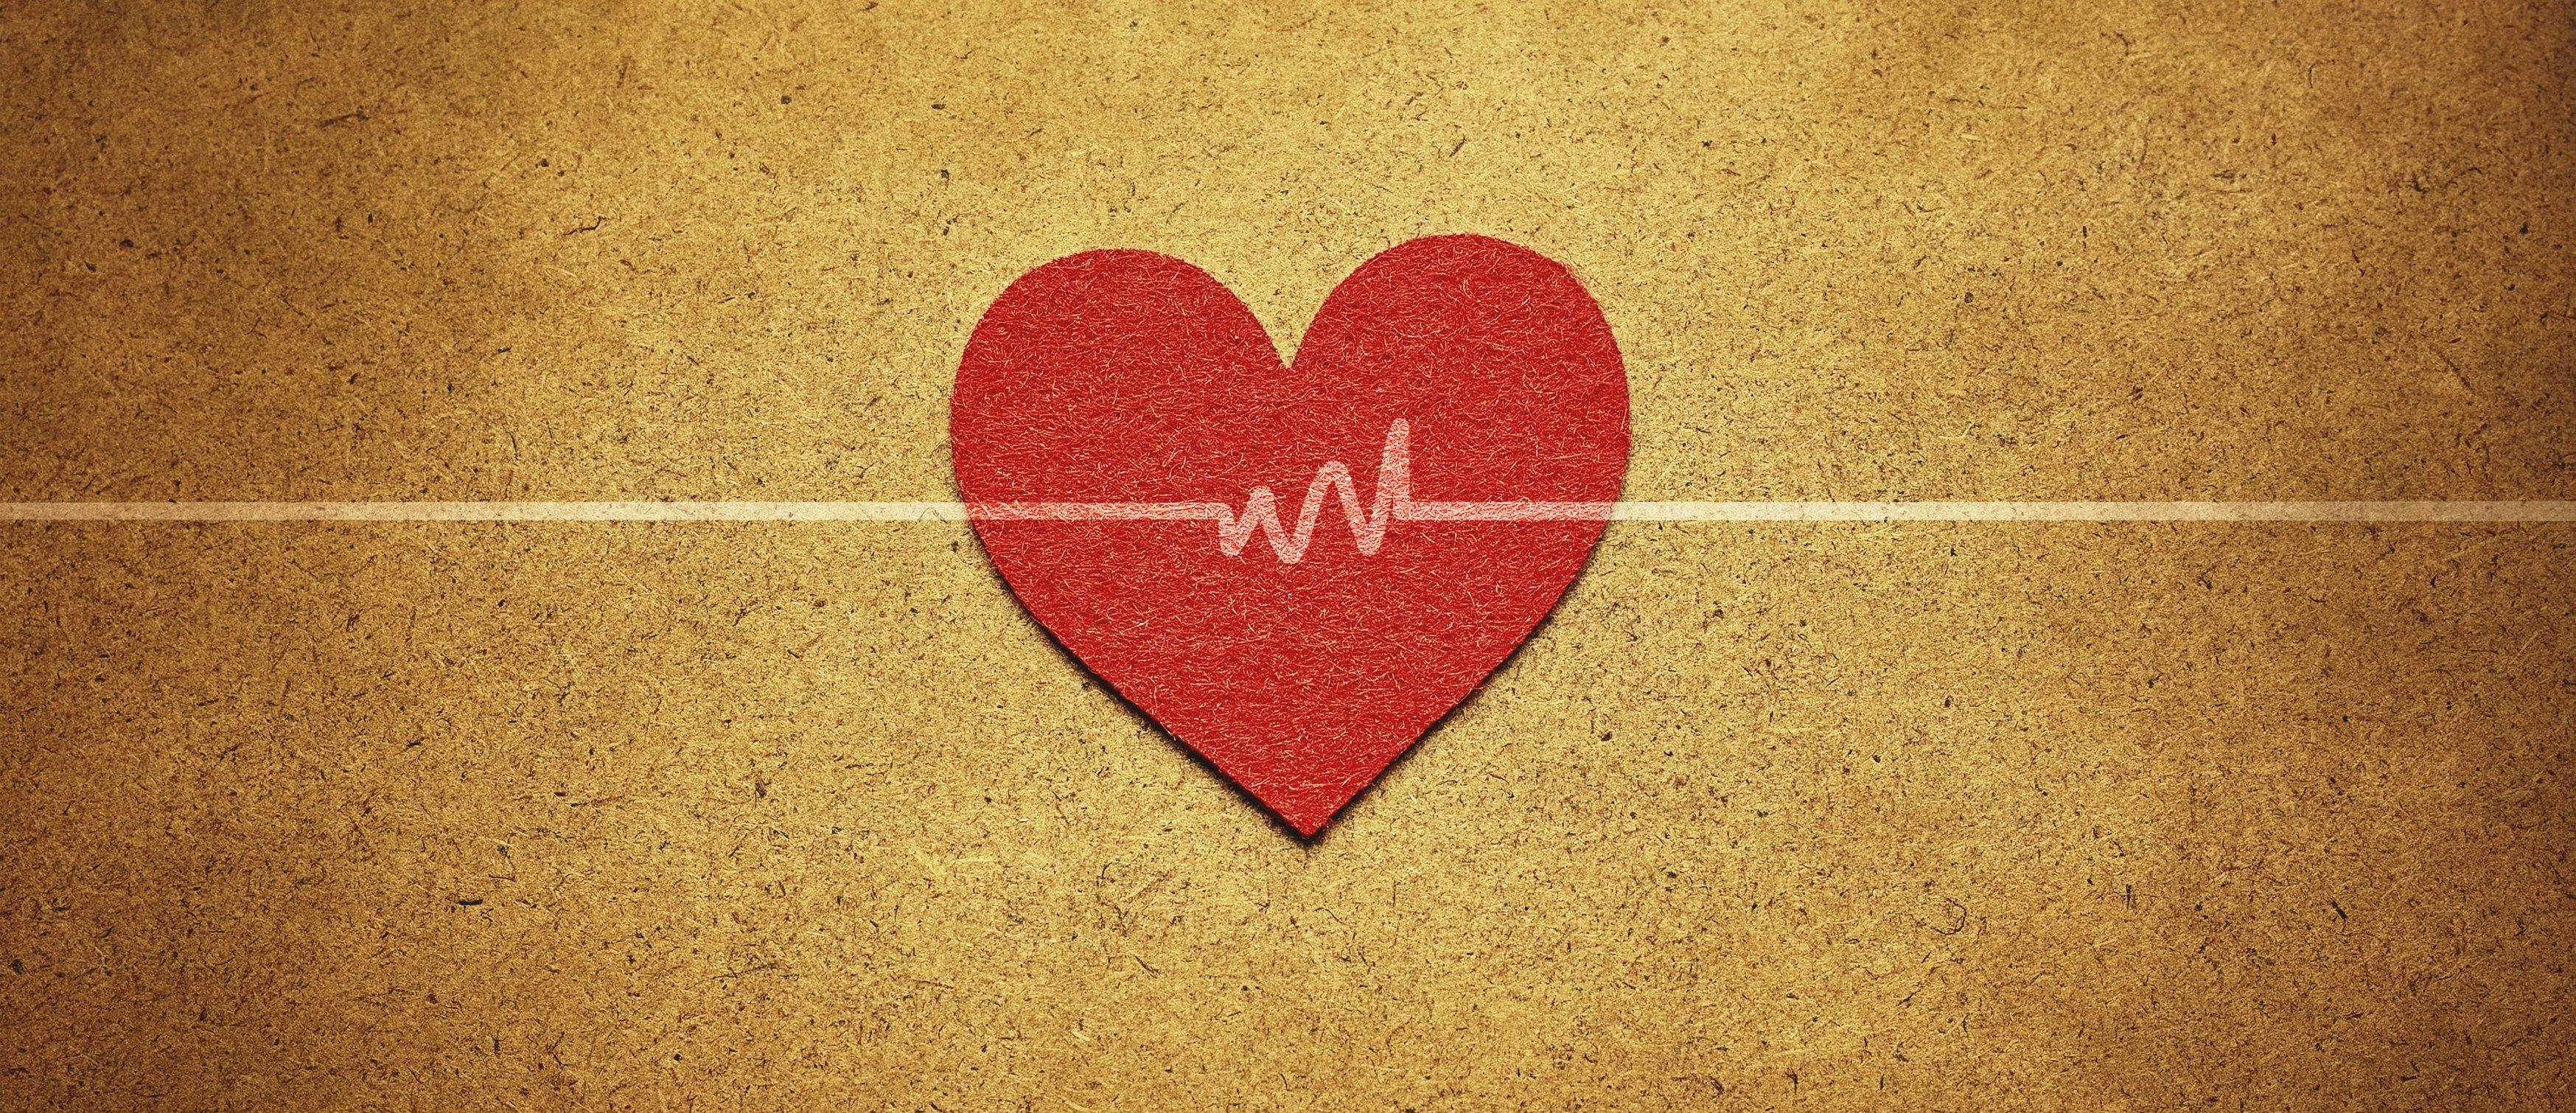 Faster Heart Rate May Predict Diabetes Development